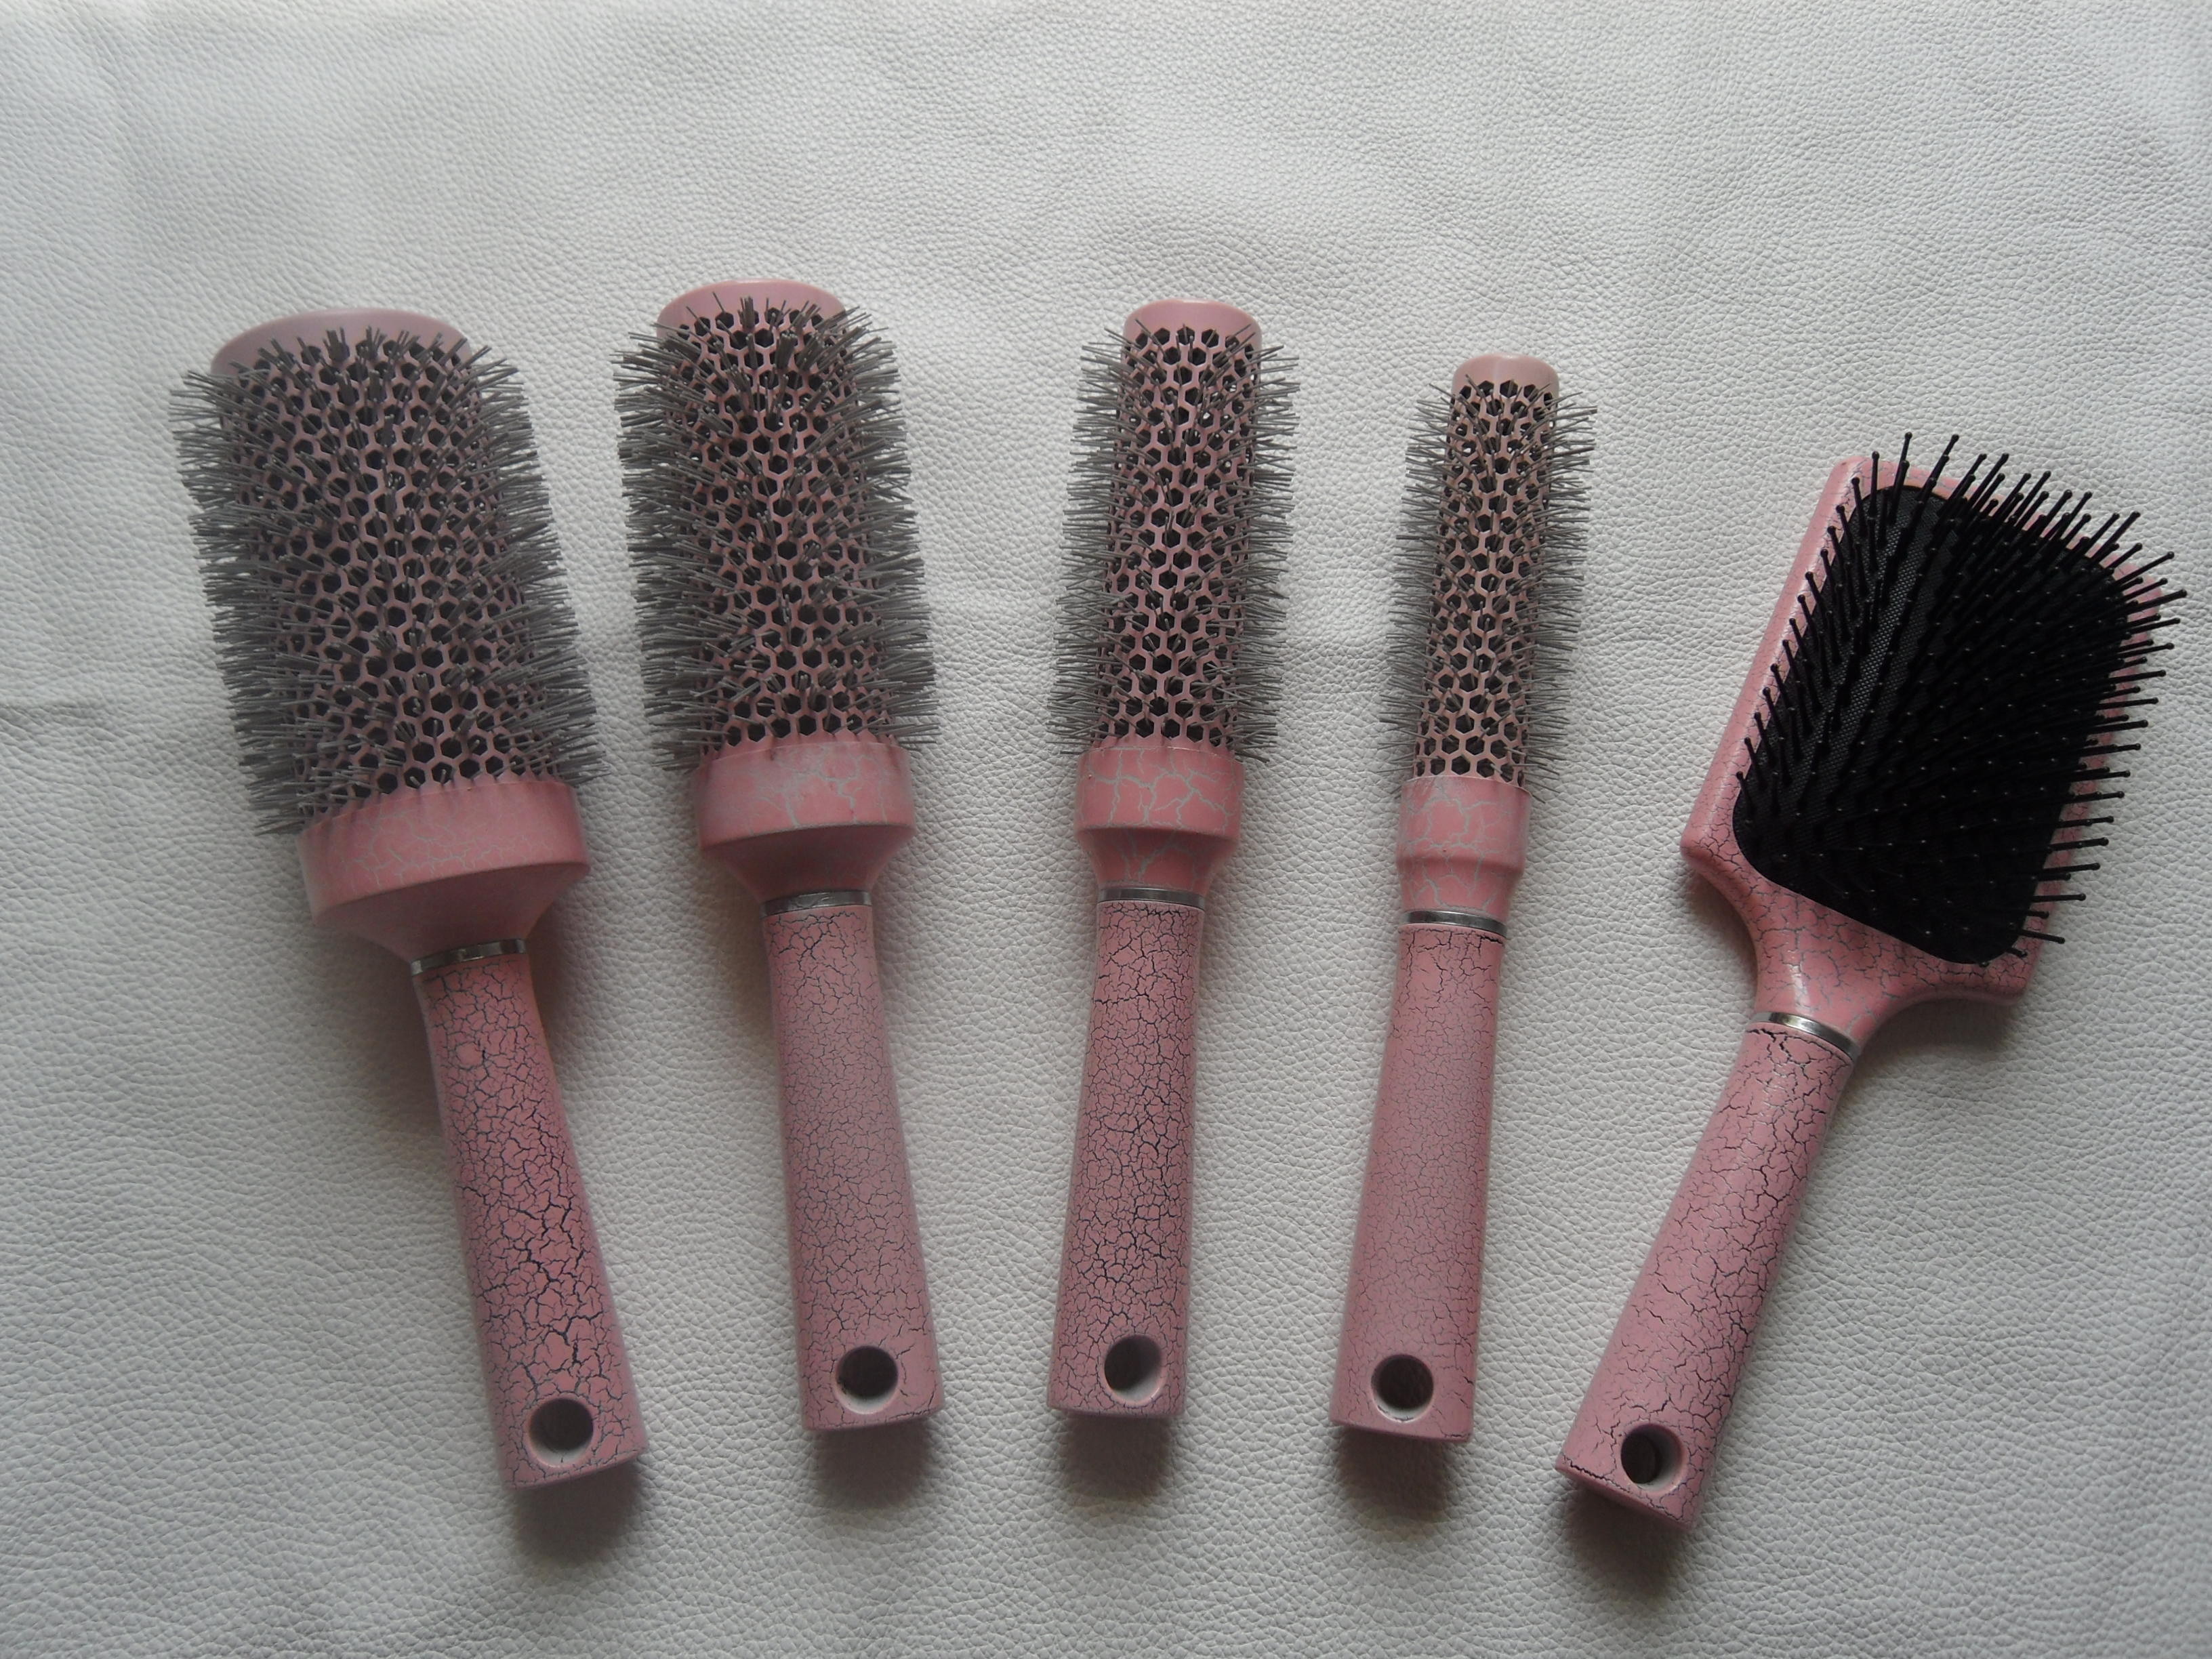 Cheap OEM 19mm, 25mm, 32mm, 43mm, 53mm Ionic Blow Dry Styling Round Hair Brush for sale